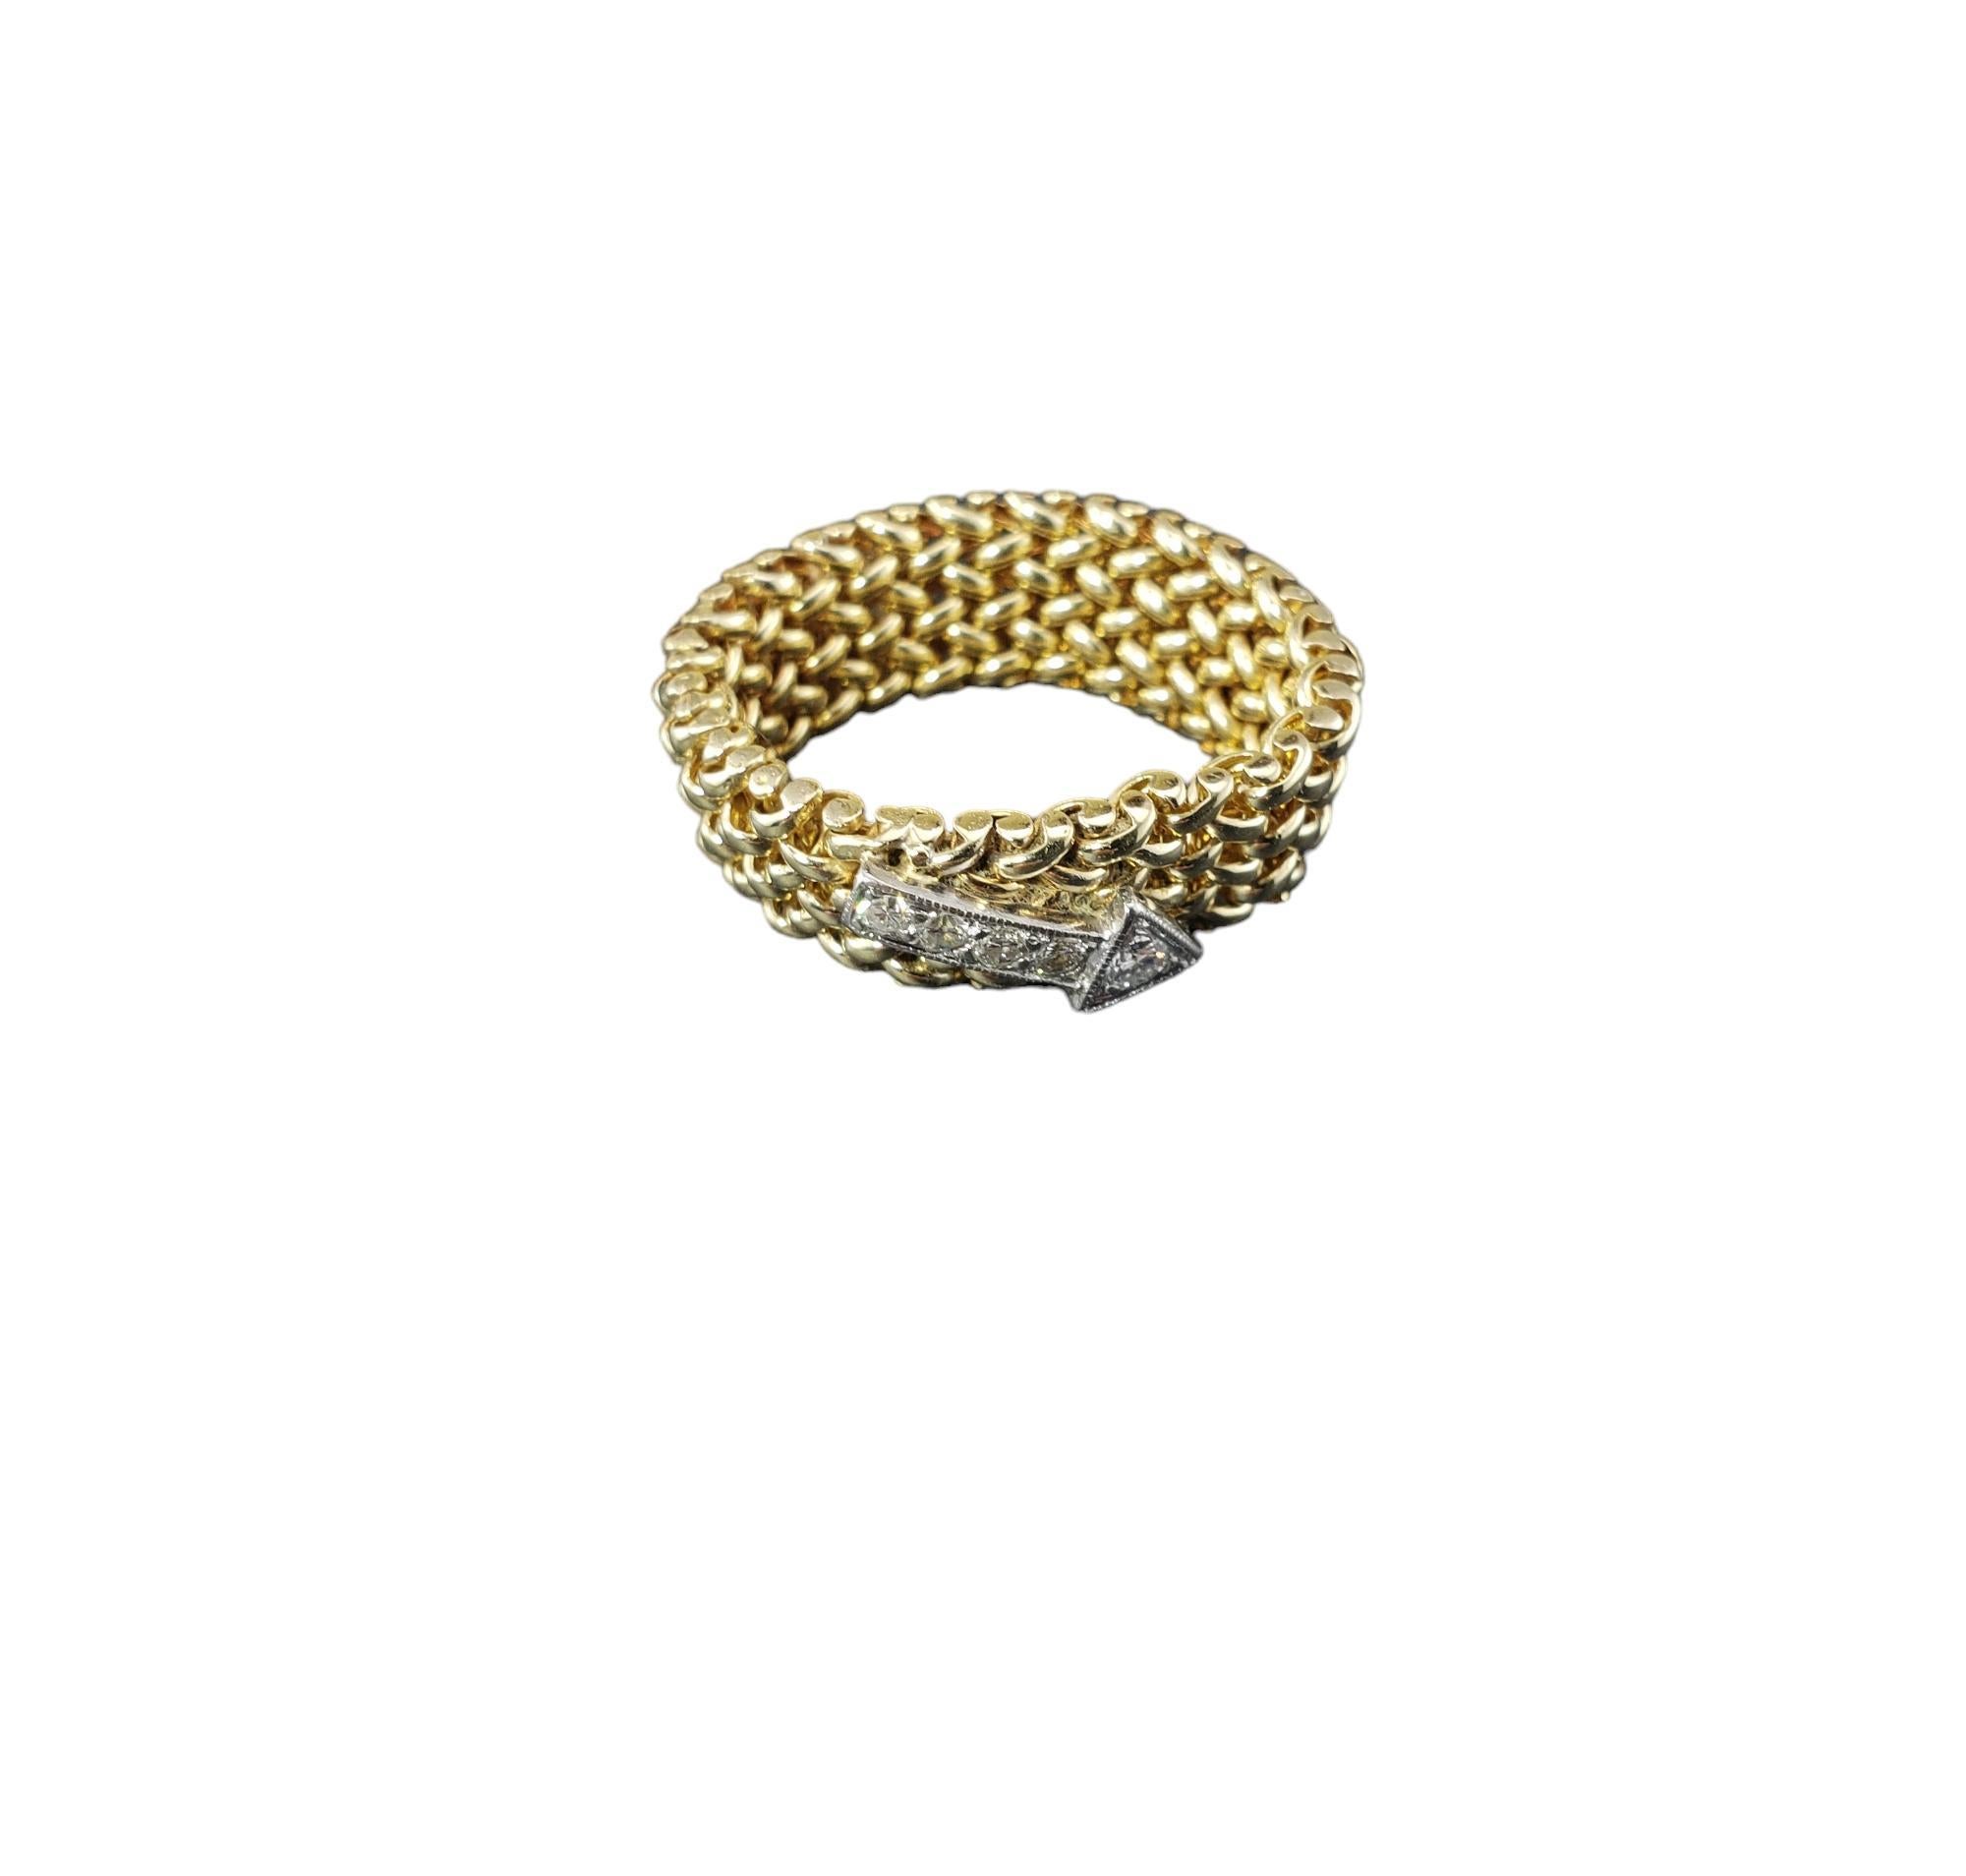 14 Karat Yellow Gold and Diamond Mesh Ring Size 8.25

This stunning mesh 14K yellow gold ring features a five round brilliant cut diamonds set in an arrow design. 

Width:  7.5 mm.

Approximate total diamond weight: .12 ct.

Diamond color: